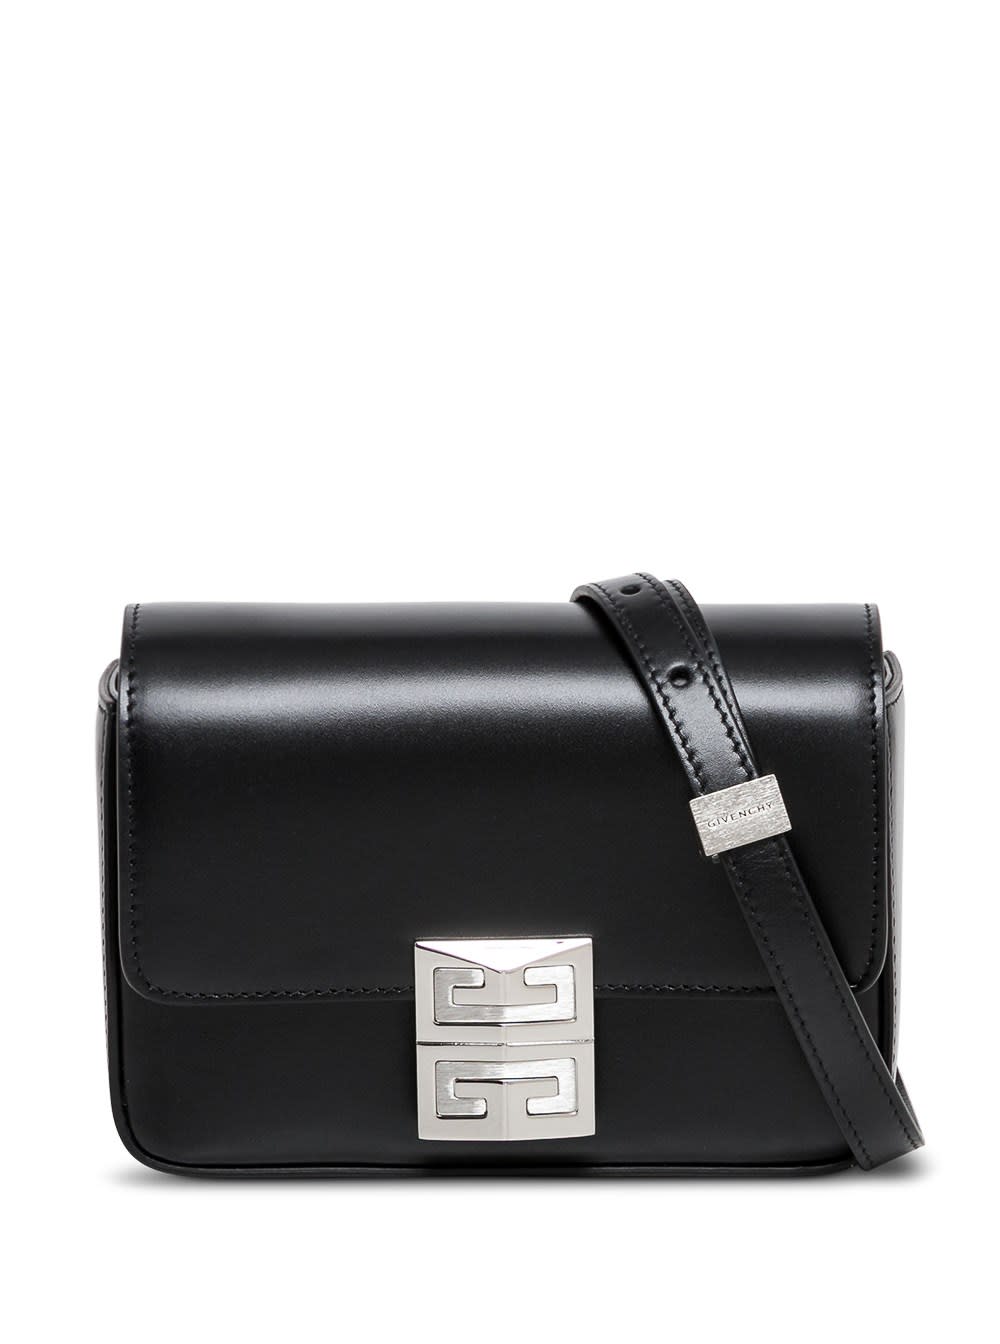 Givenchy Black Leather Crossbody Bag With Logo Buckle